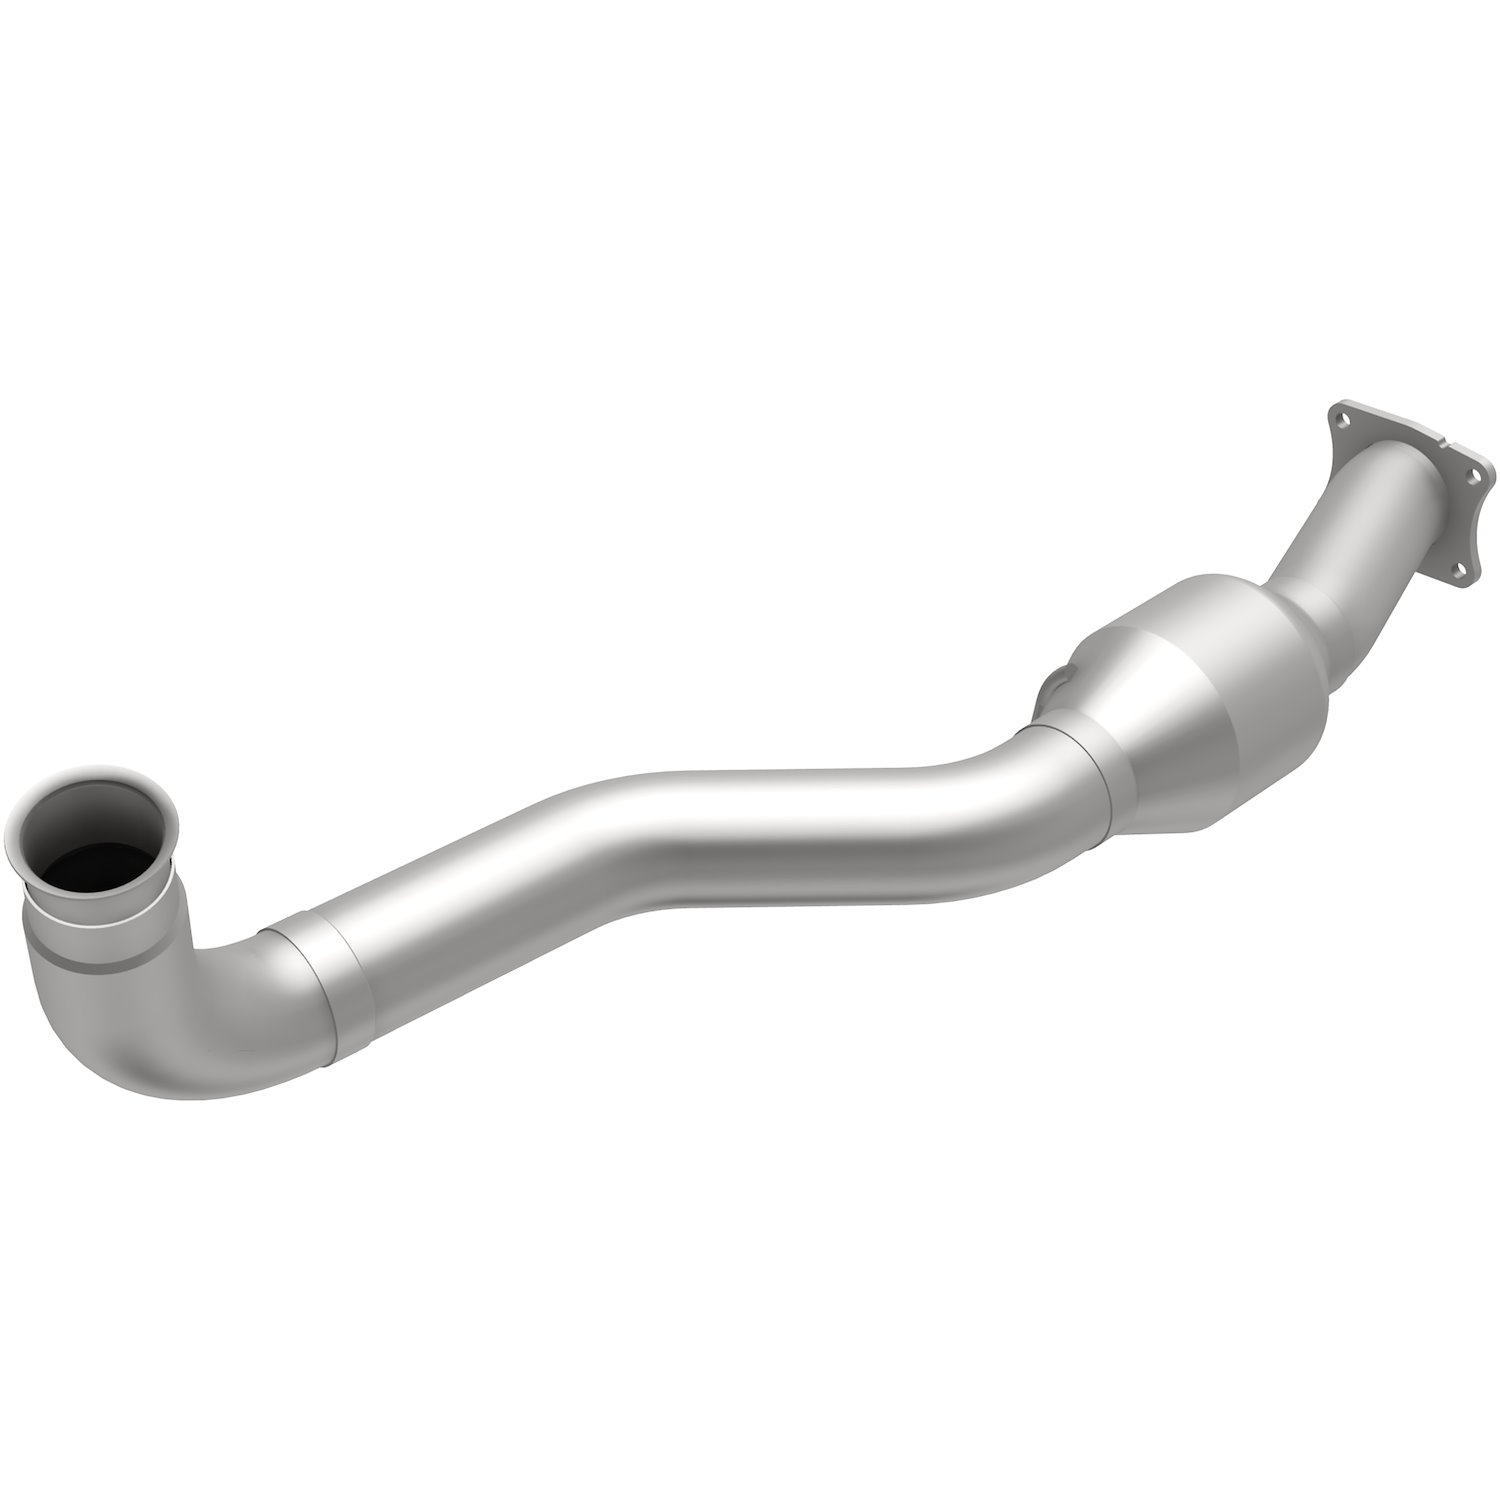 HM Grade Federal / EPA Compliant Direct-Fit Catalytic Converter 60501